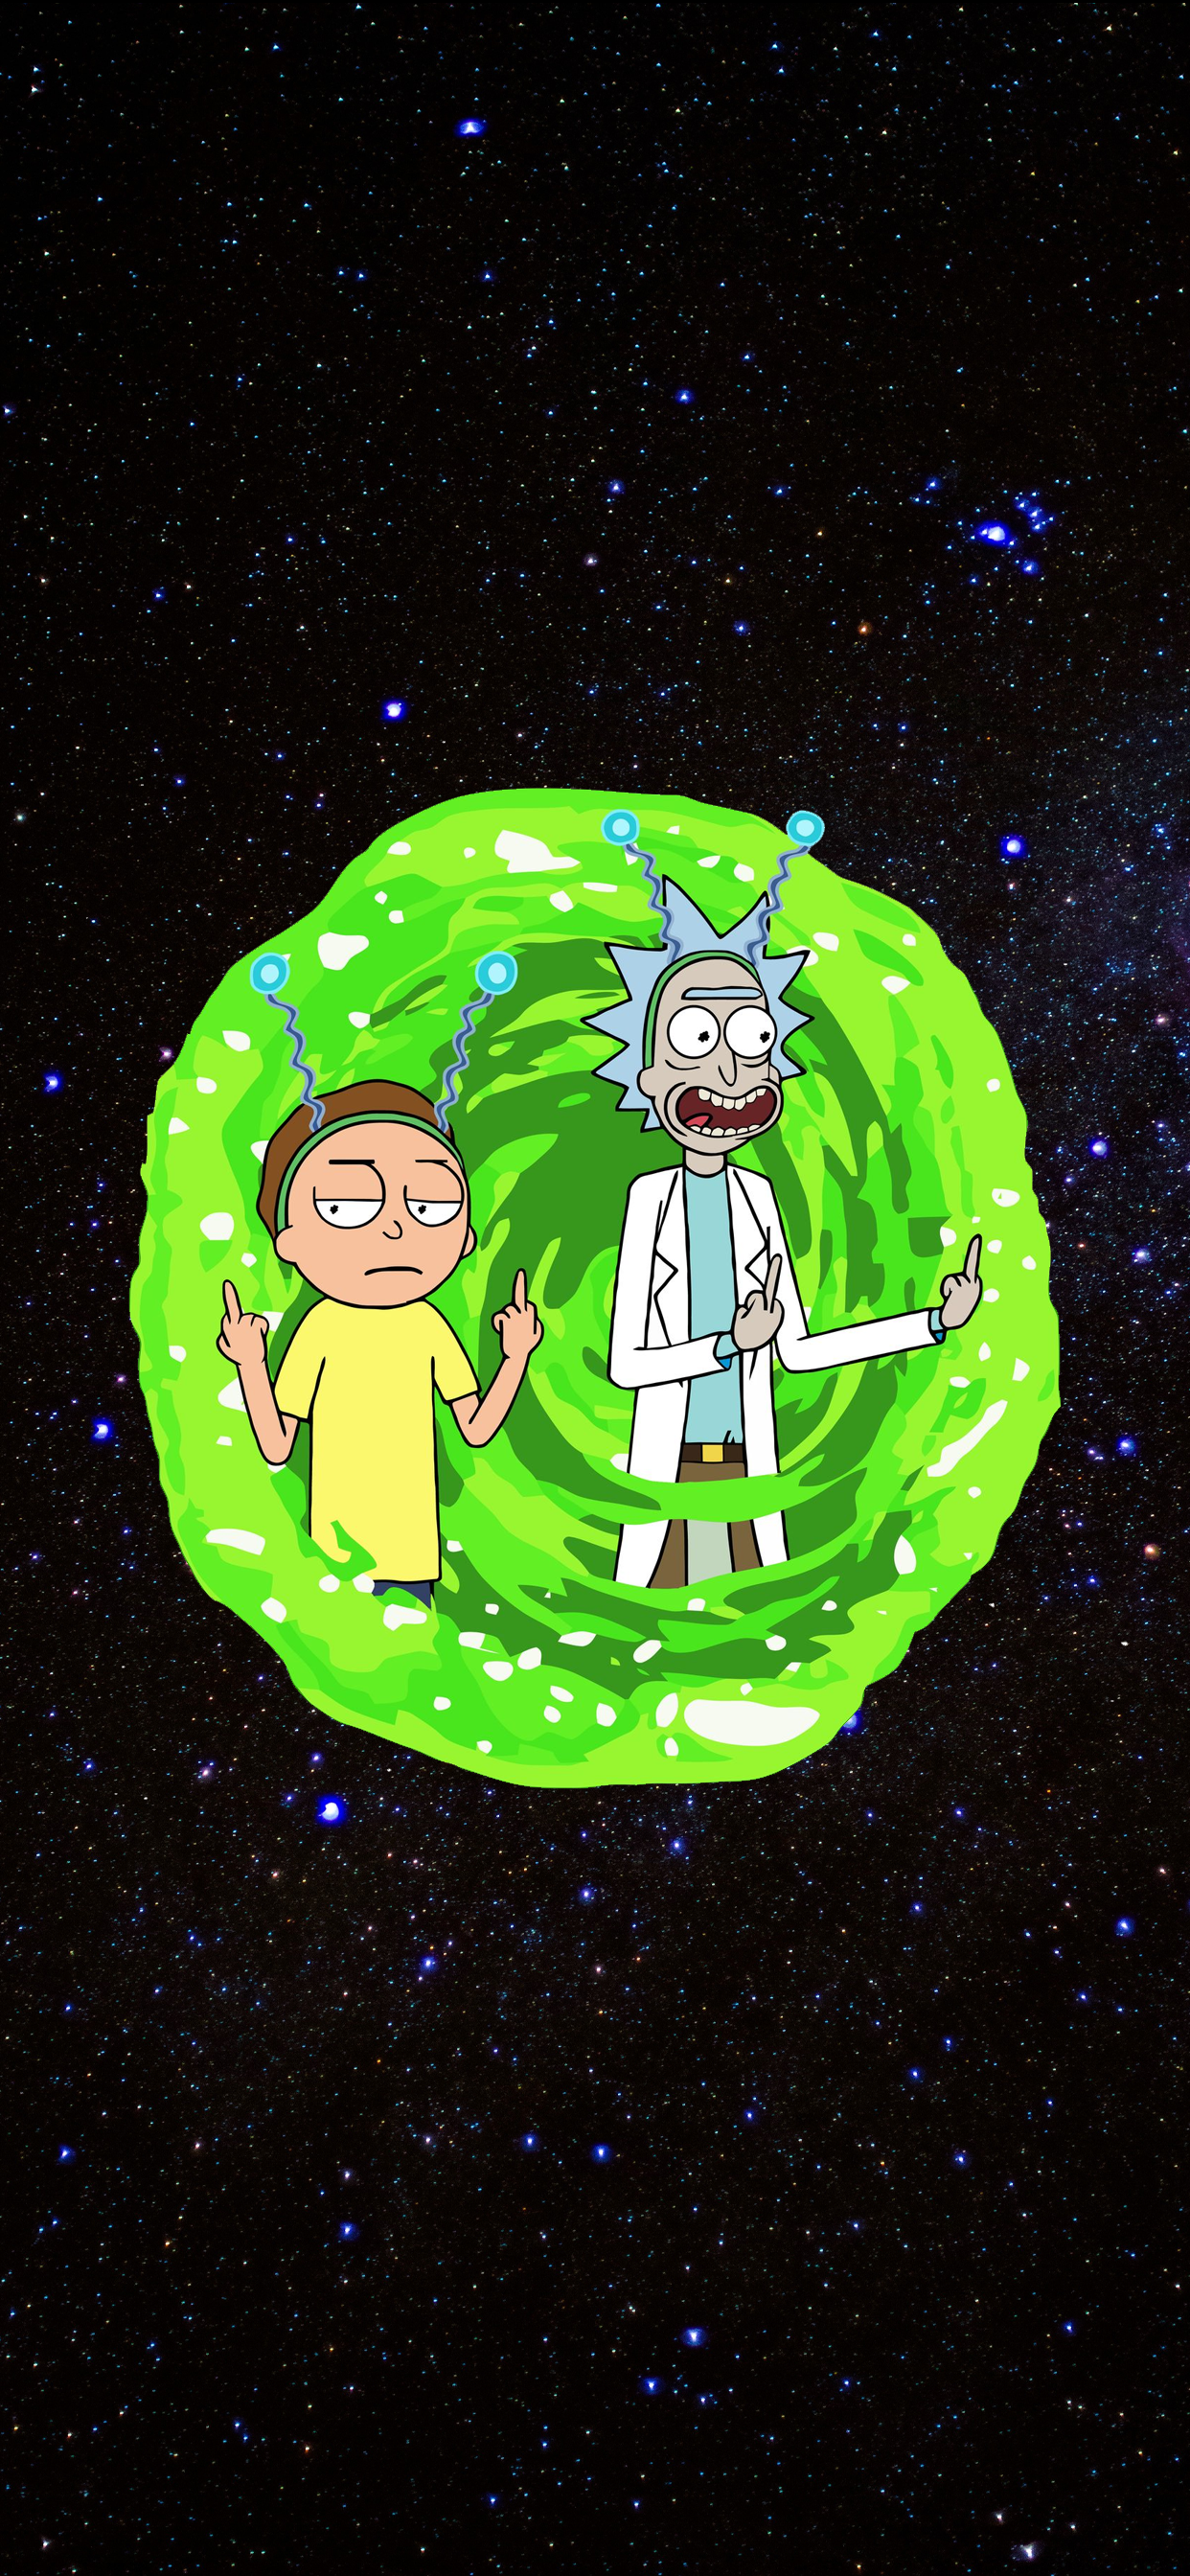 HEROSCREEN: Rick and Morty phone wallpaper collection. iPhone wallpaper rick and morty, Rick and morty stickers, Rick and morty drawing